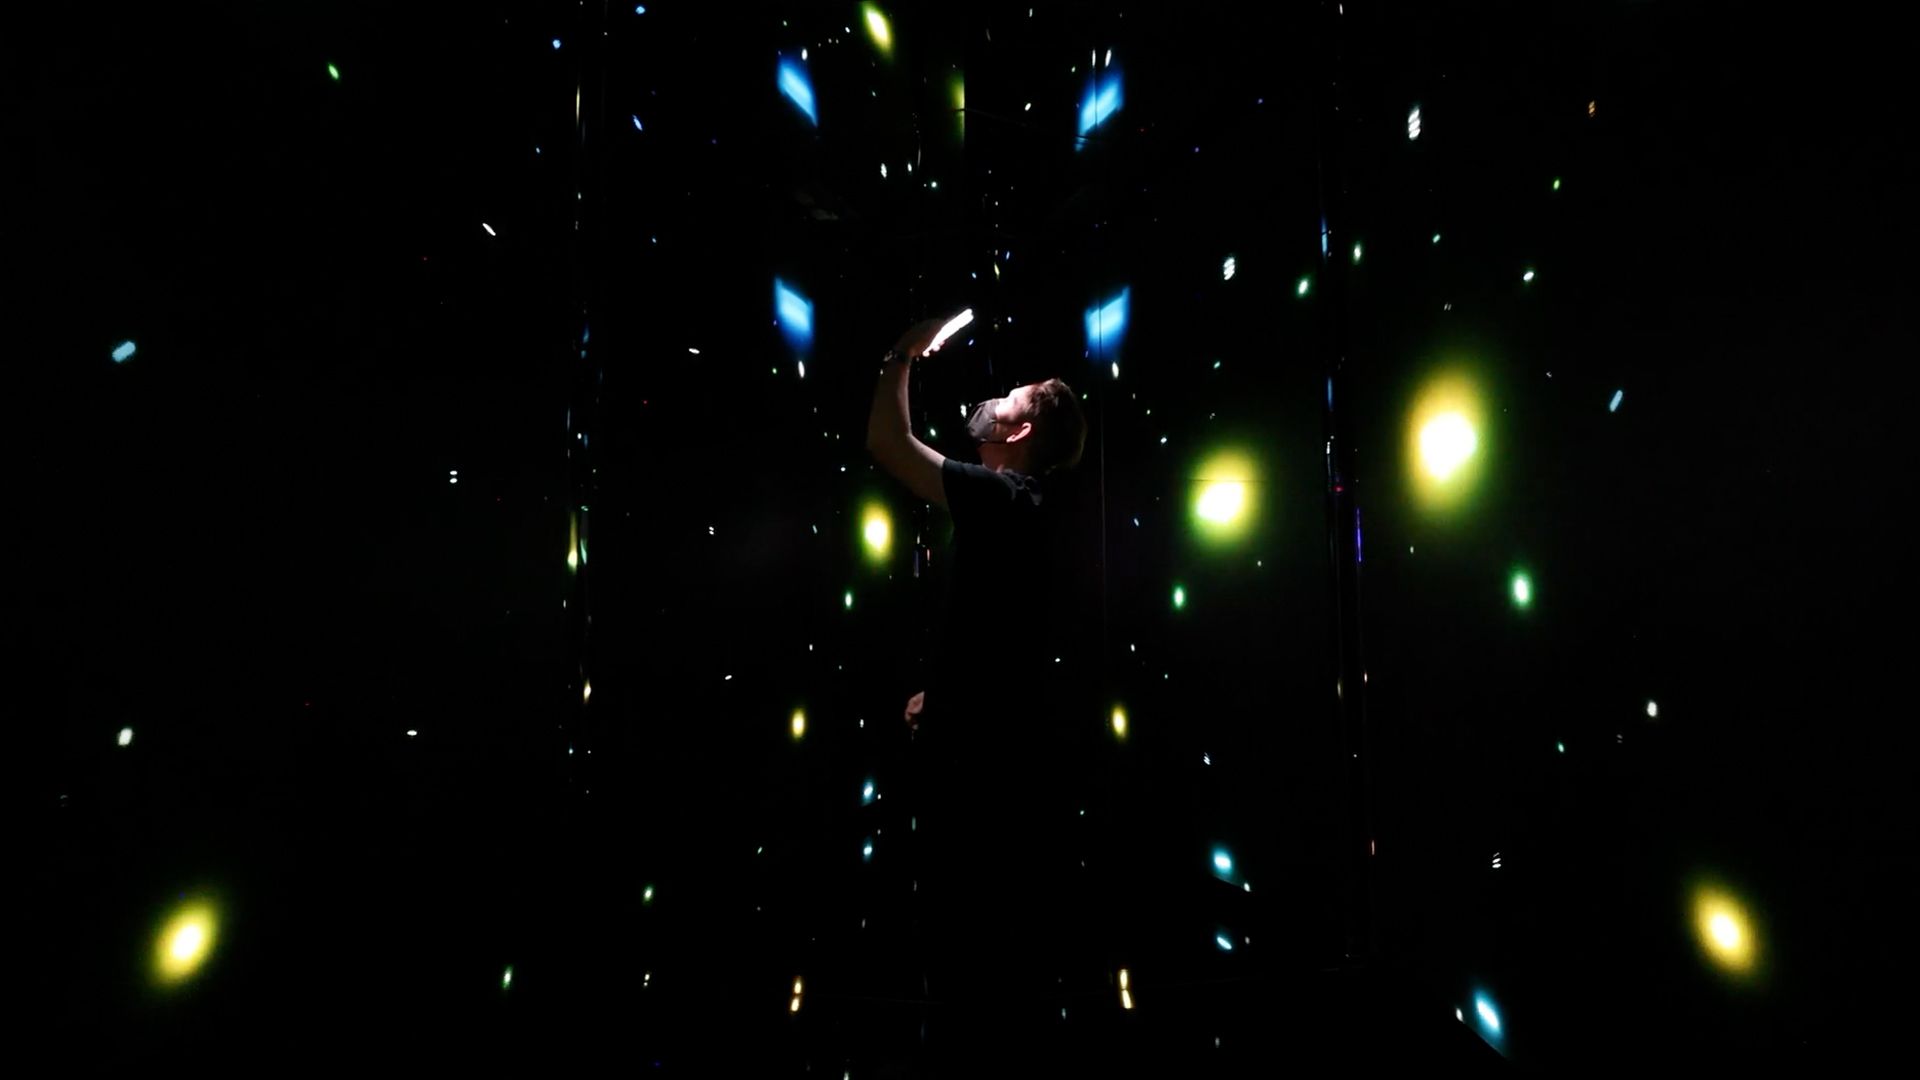 A visitor experiences the Infinity Room in solitude, immersed in interactive graphics.